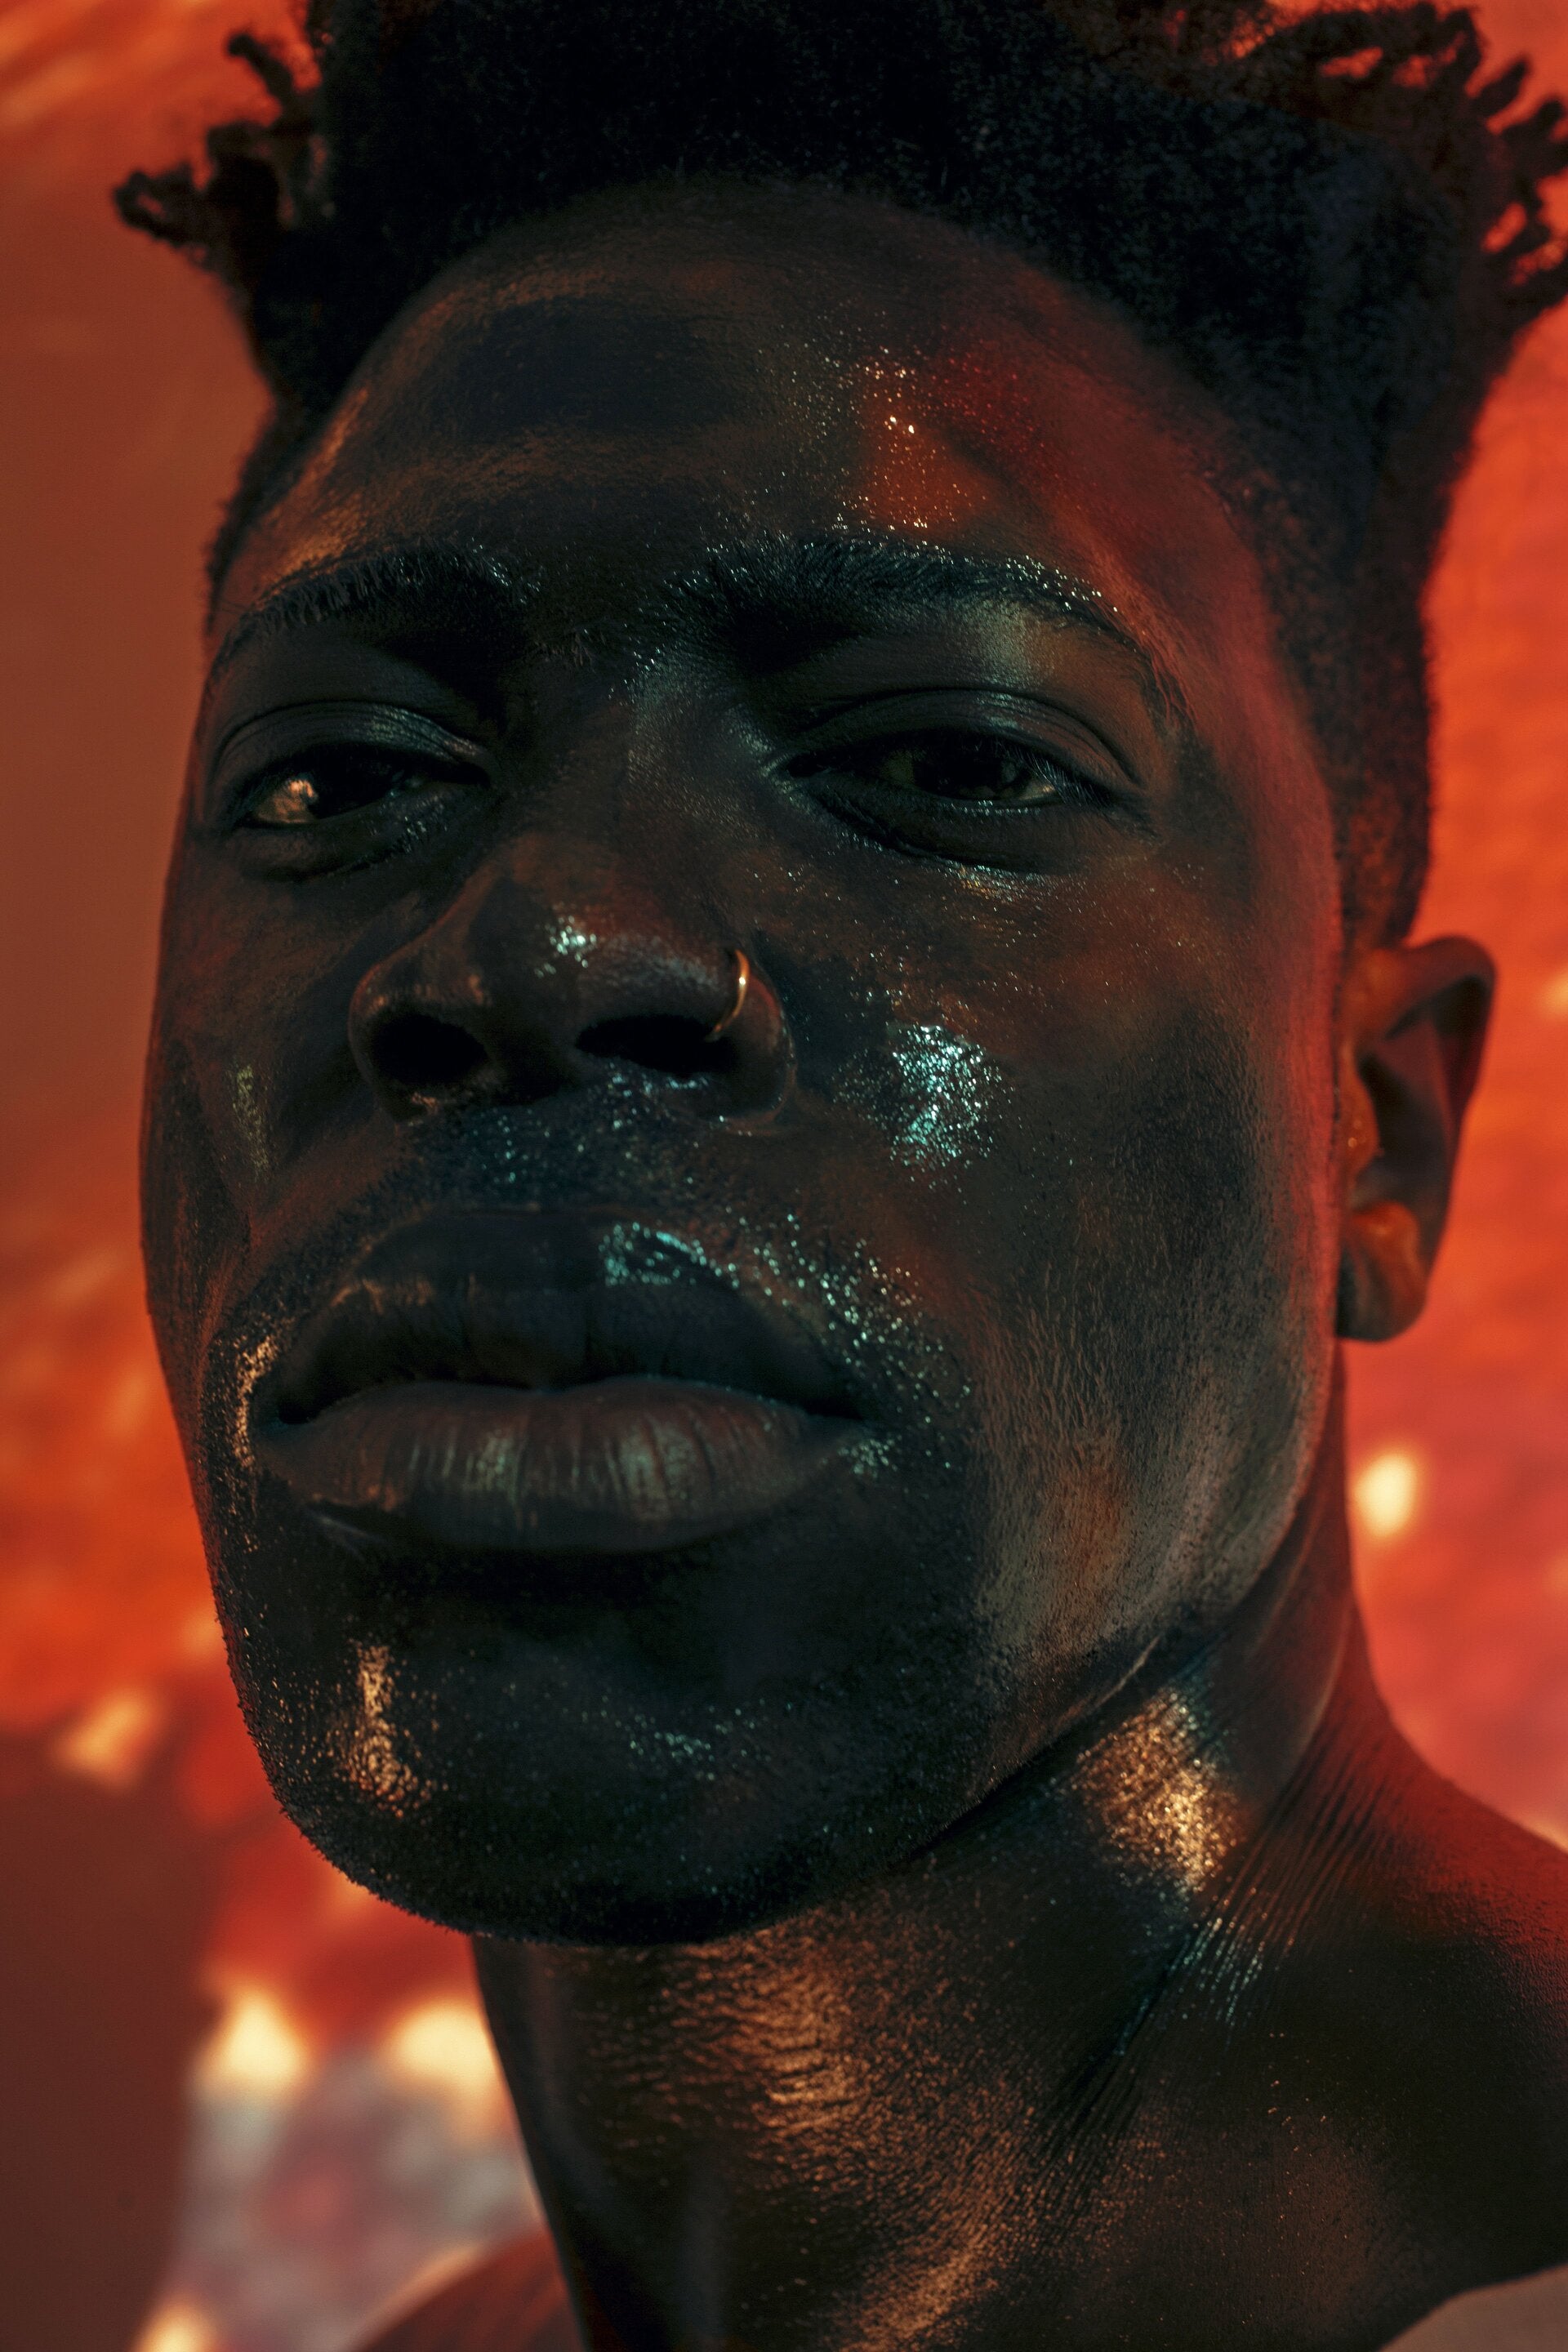 Meaning of Doomed by Moses Sumney